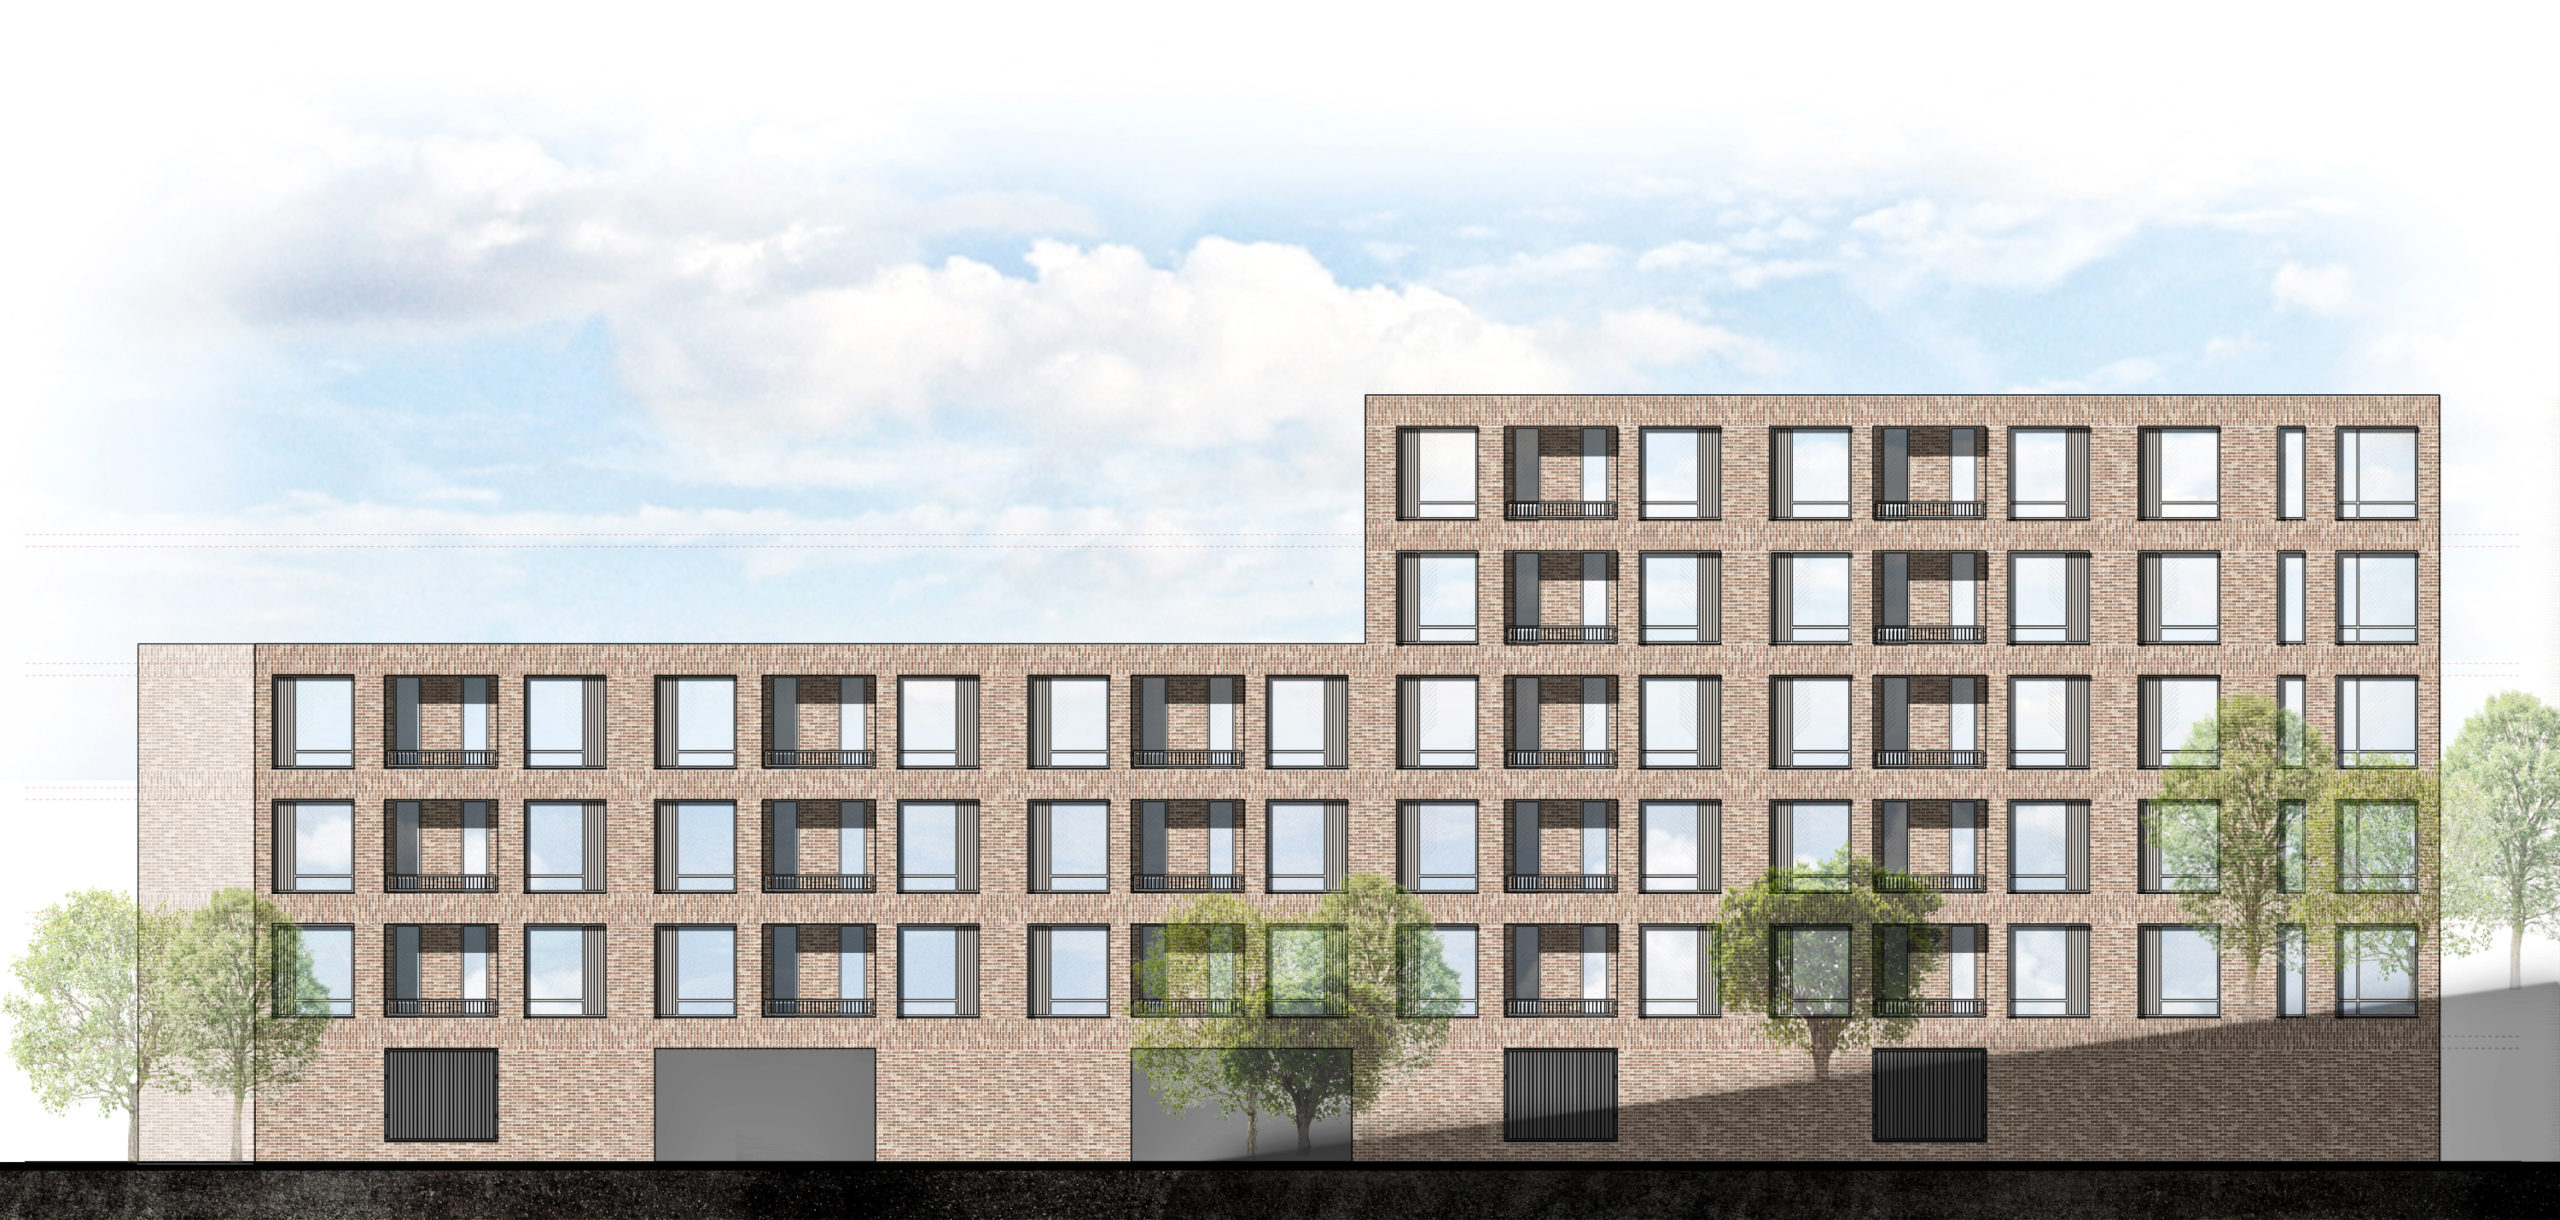 Elevation drawings for apartment building in Knowsley